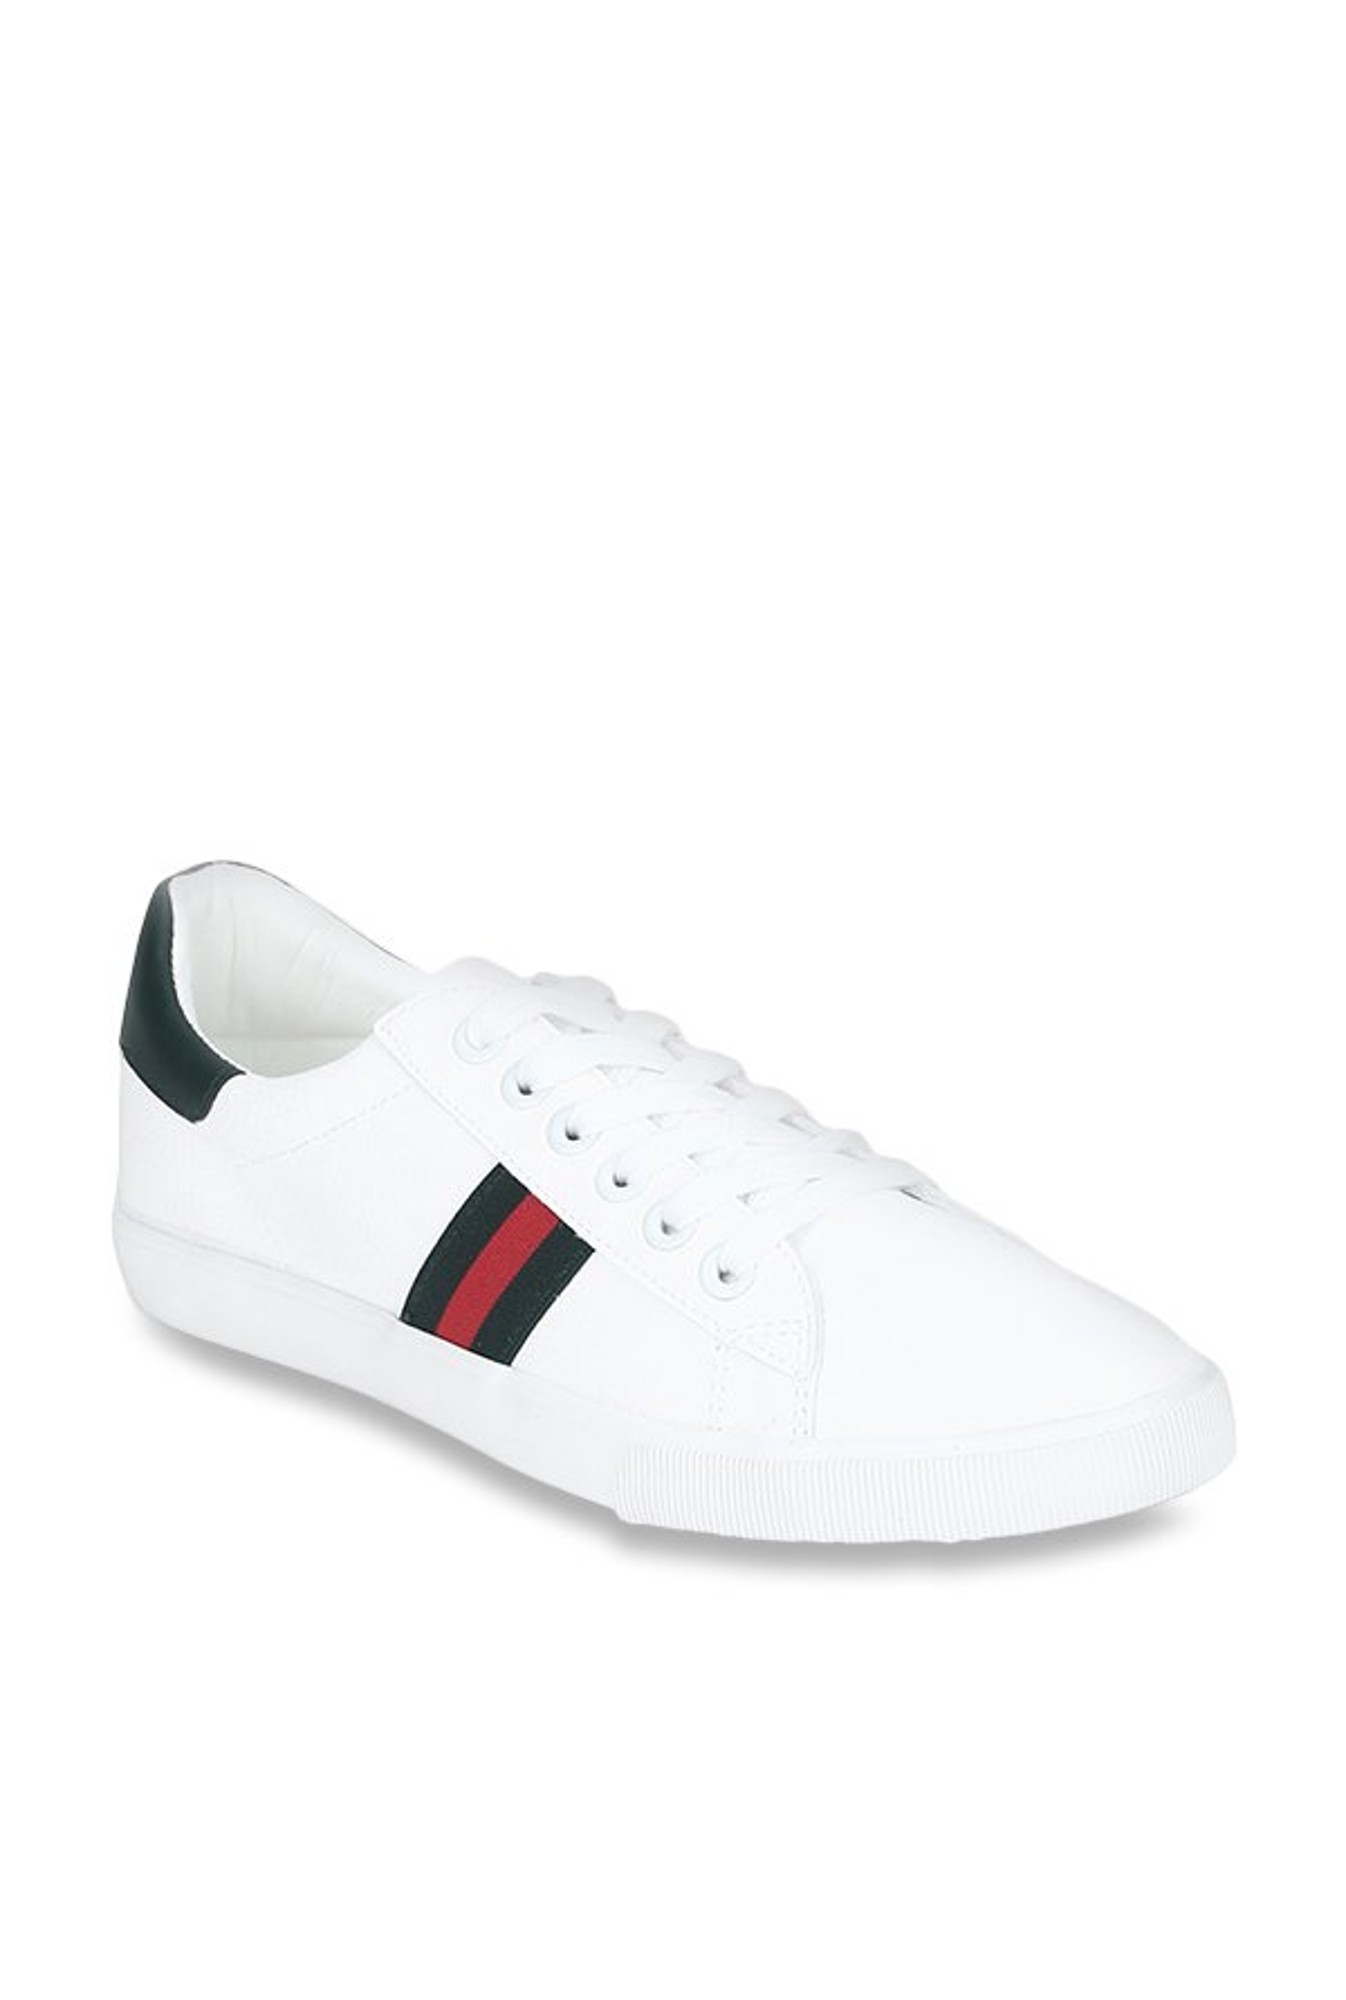 white sneakers red tape